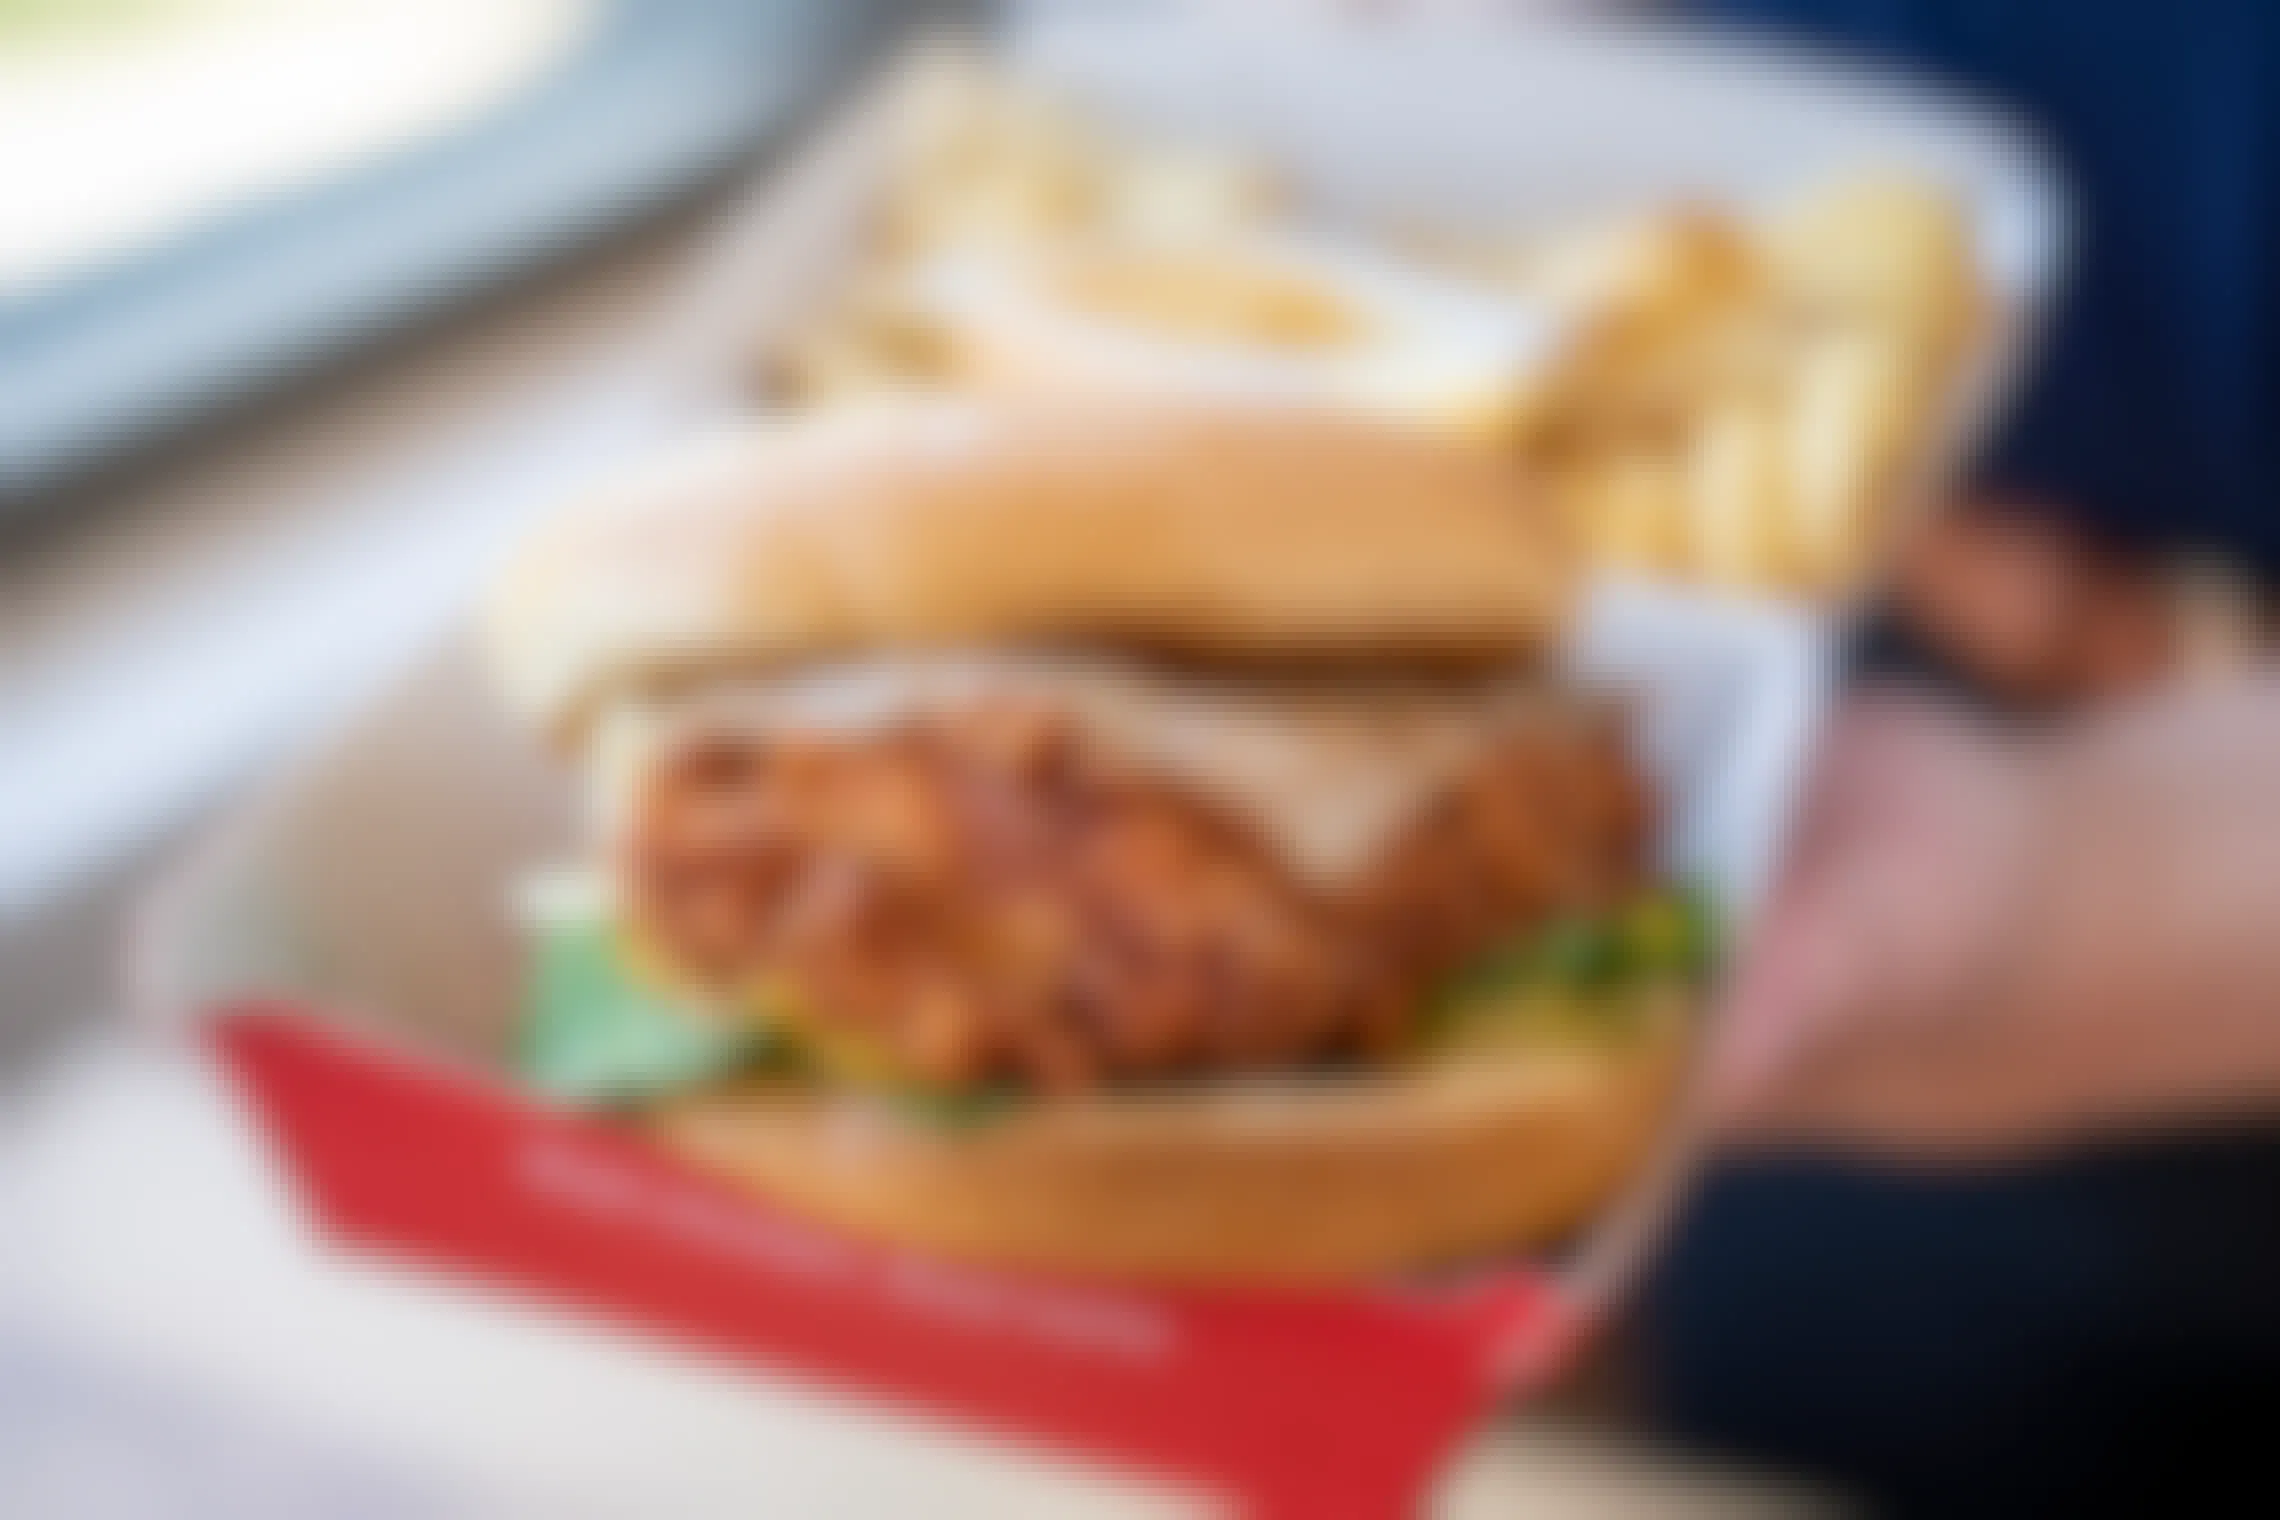 A chick-ful-a chicken sandwich and fries